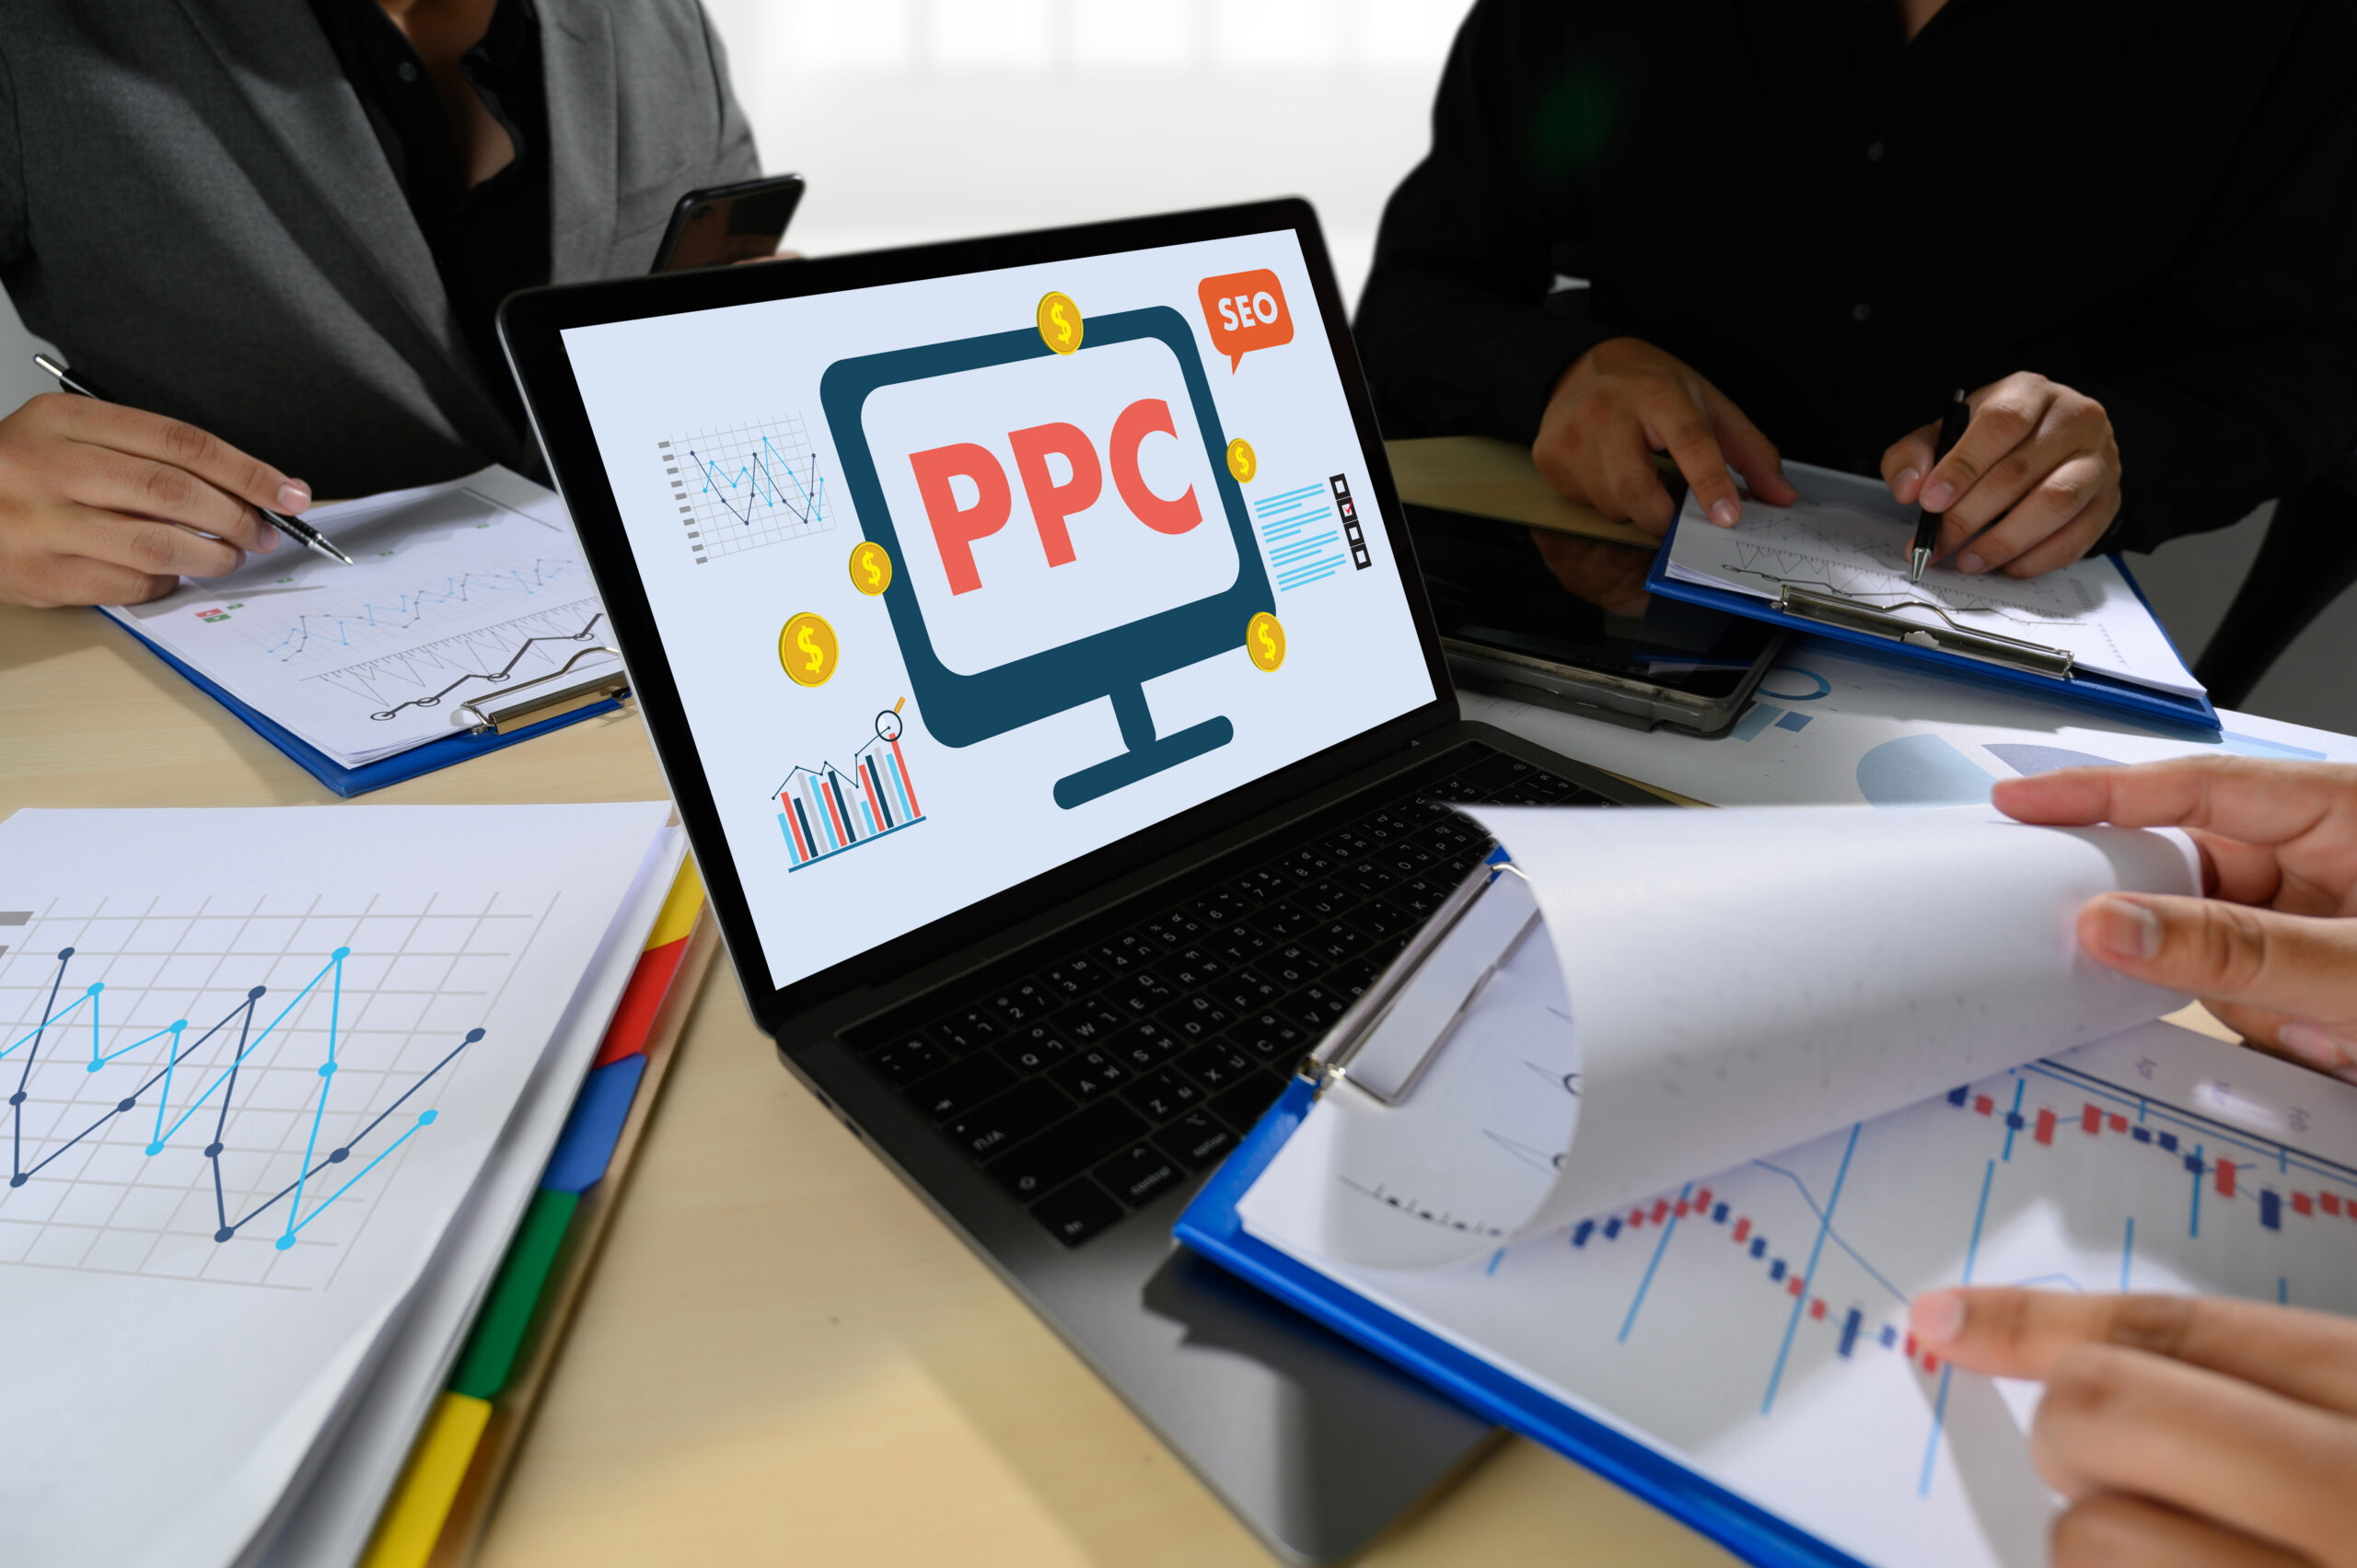  creating ppc campaign for business growth